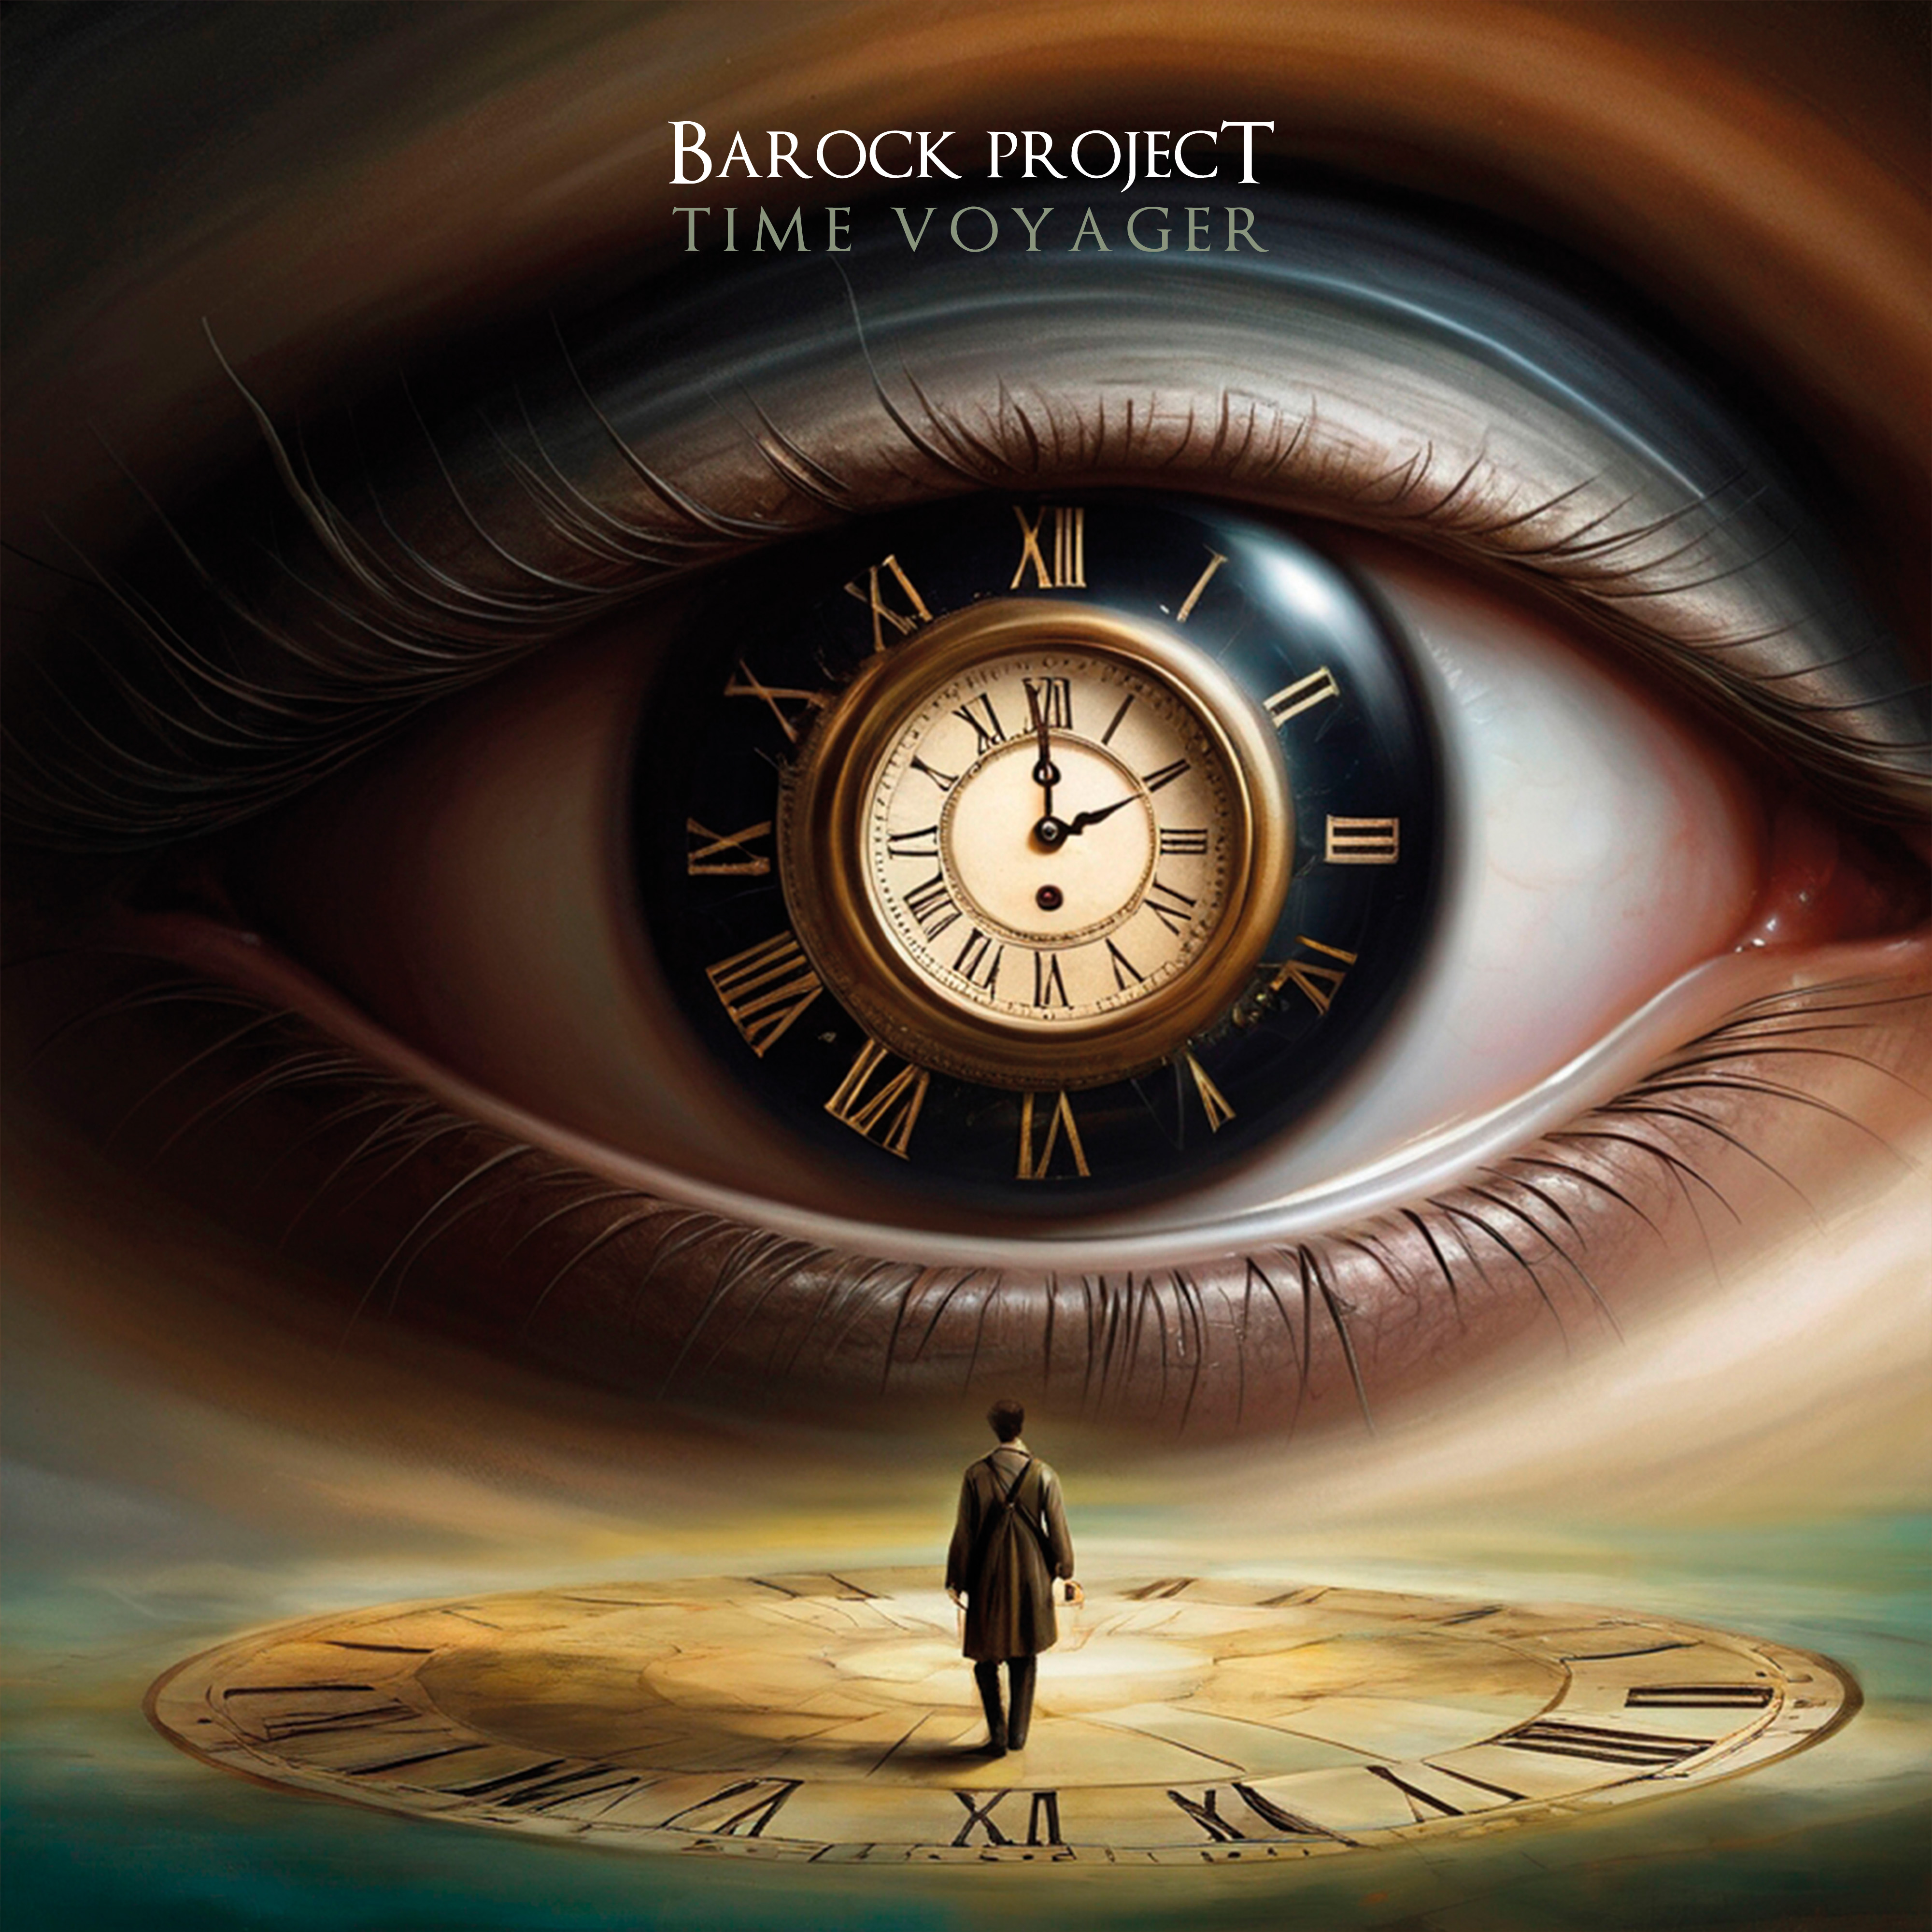 BAROCK PROJECT - Time Voyager (CD digipack)